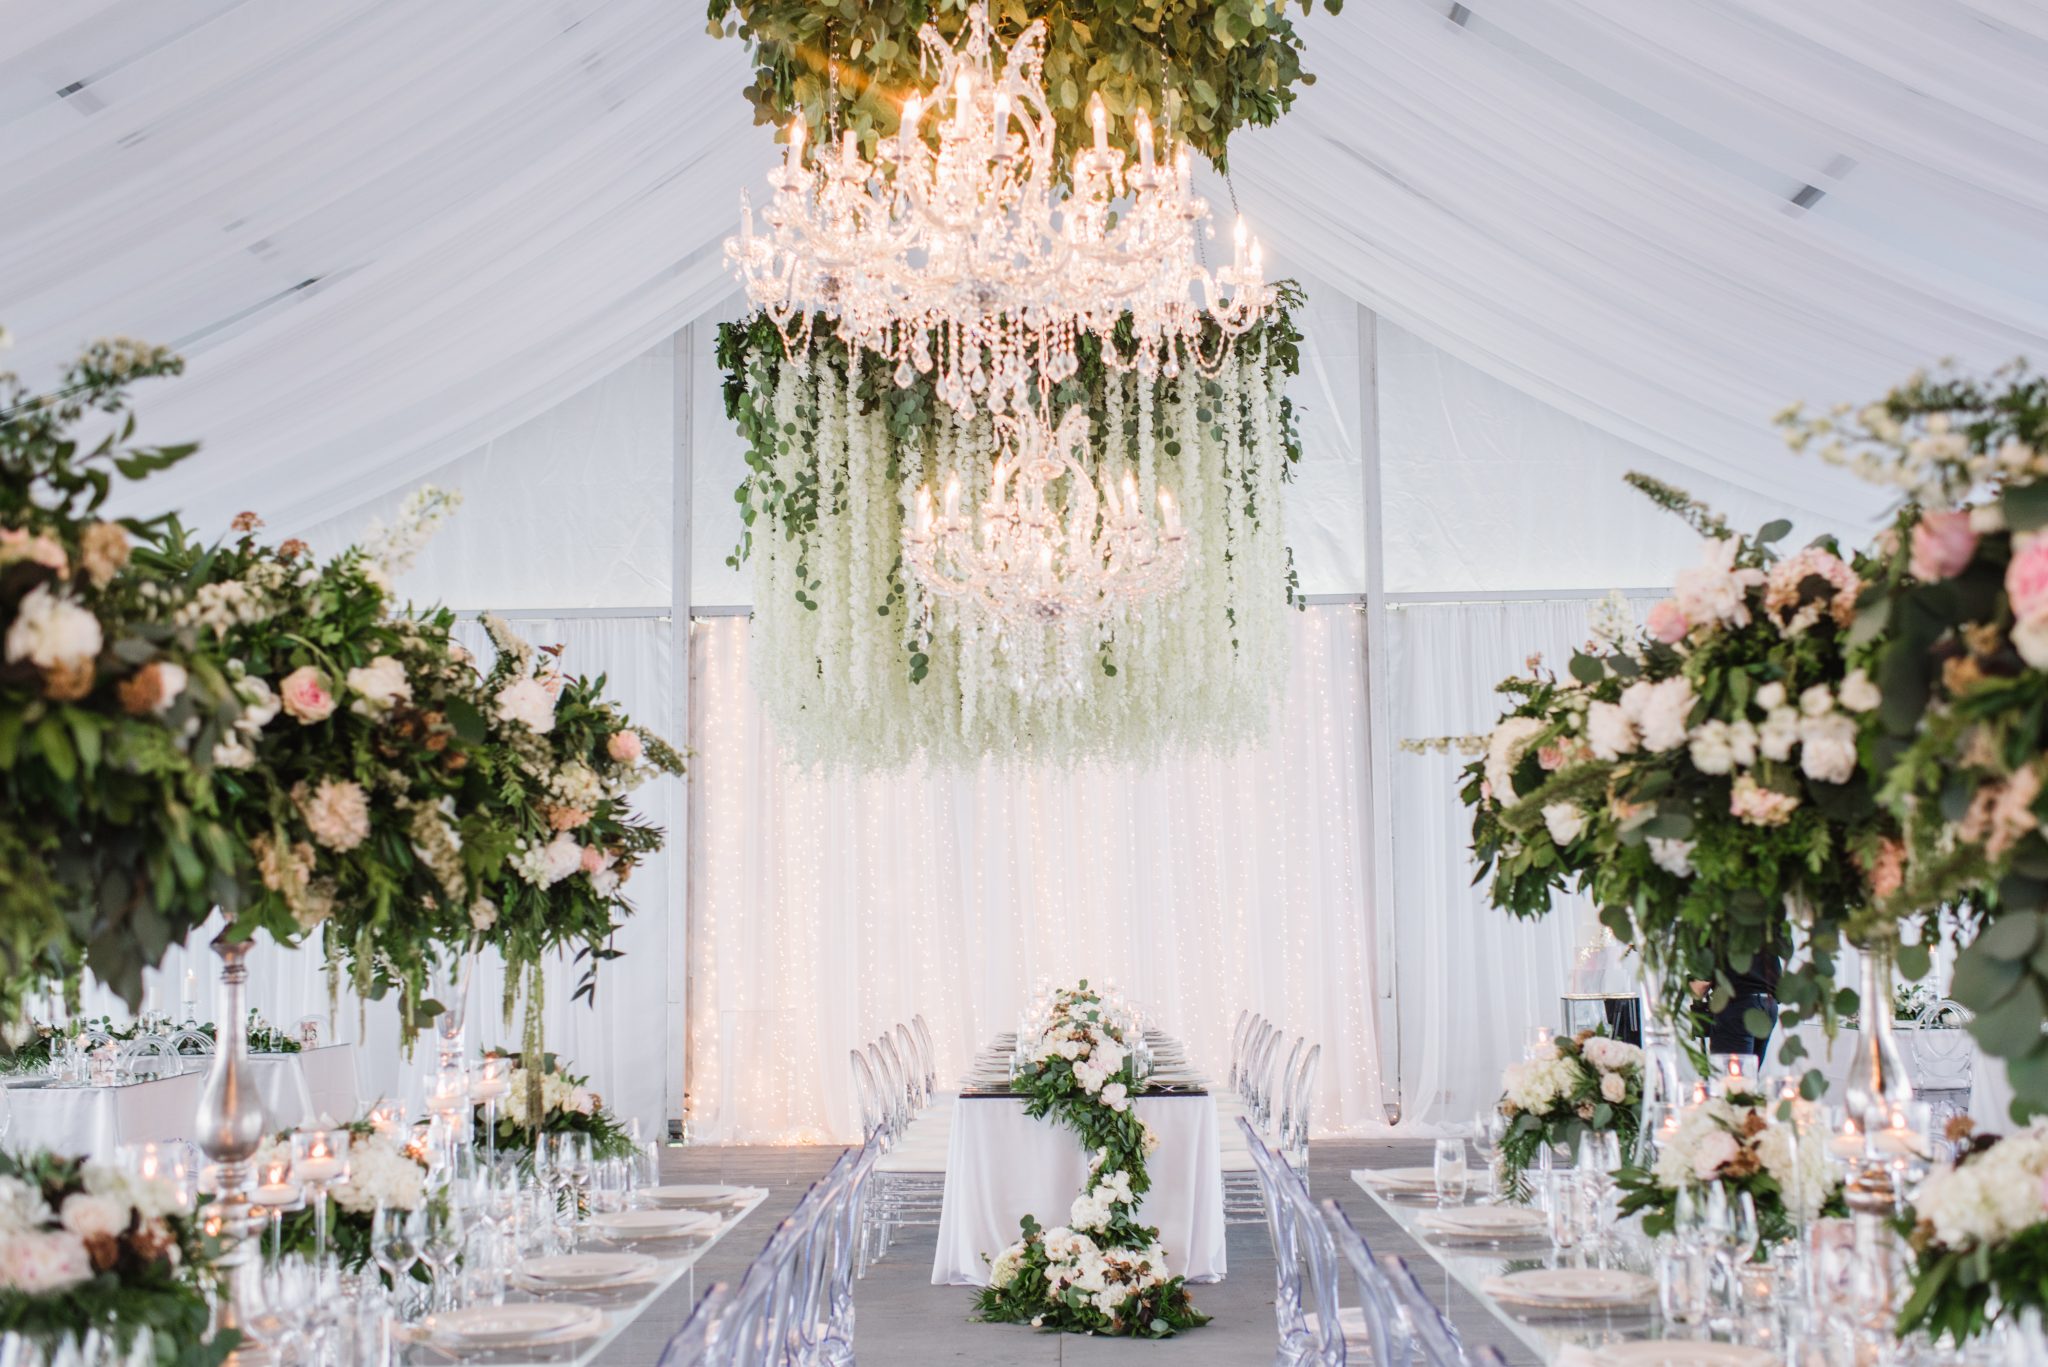 We turn your home into the perfect wedding event venue | Wedding and Event Planners | Dreamgroup